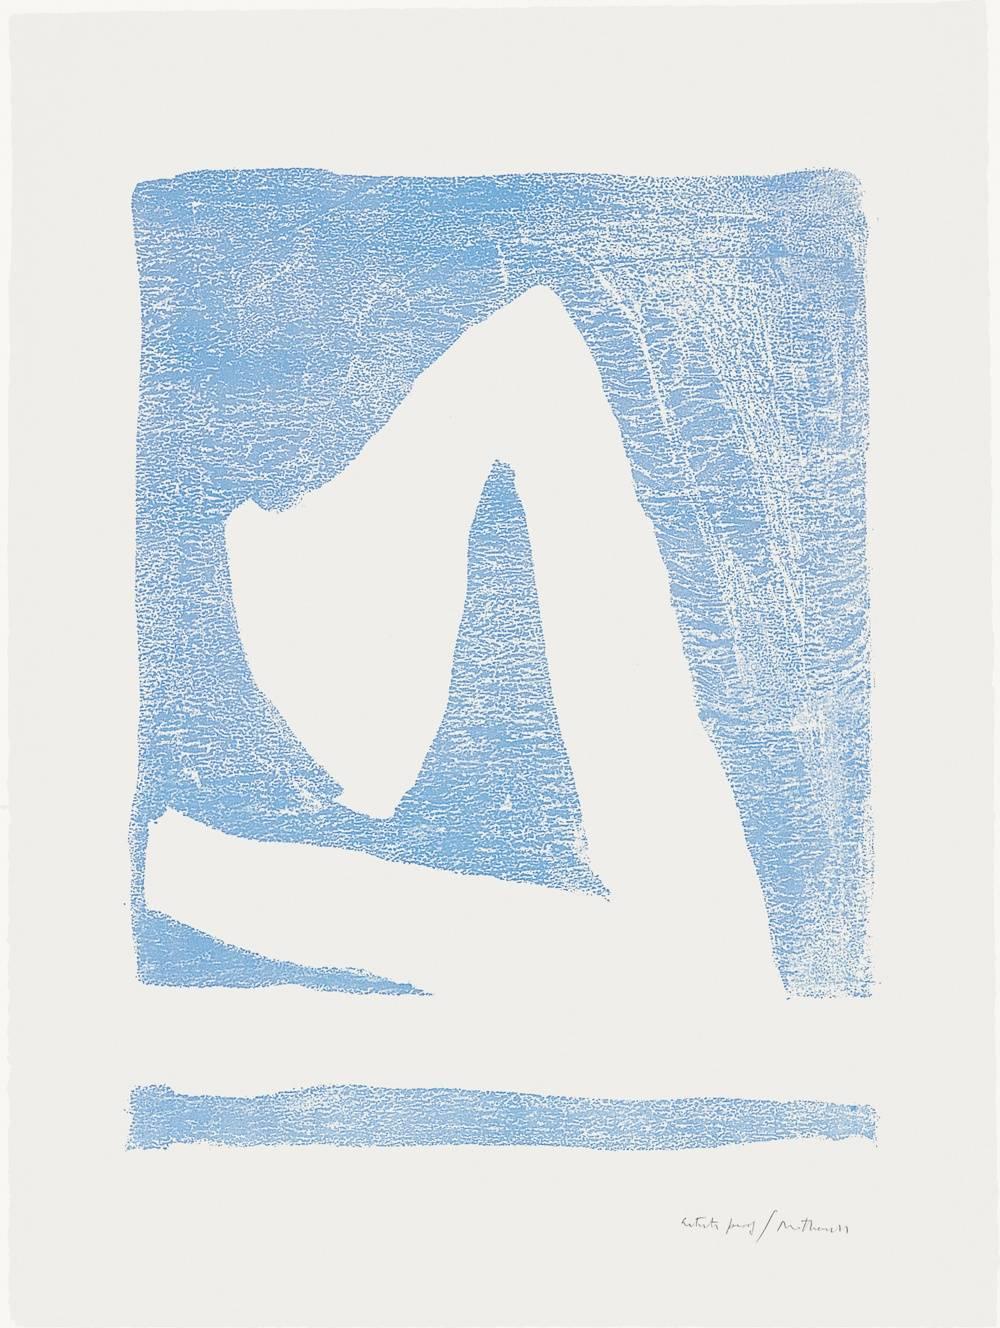 Summertime in Italy (with Blue) - Print by Robert Motherwell